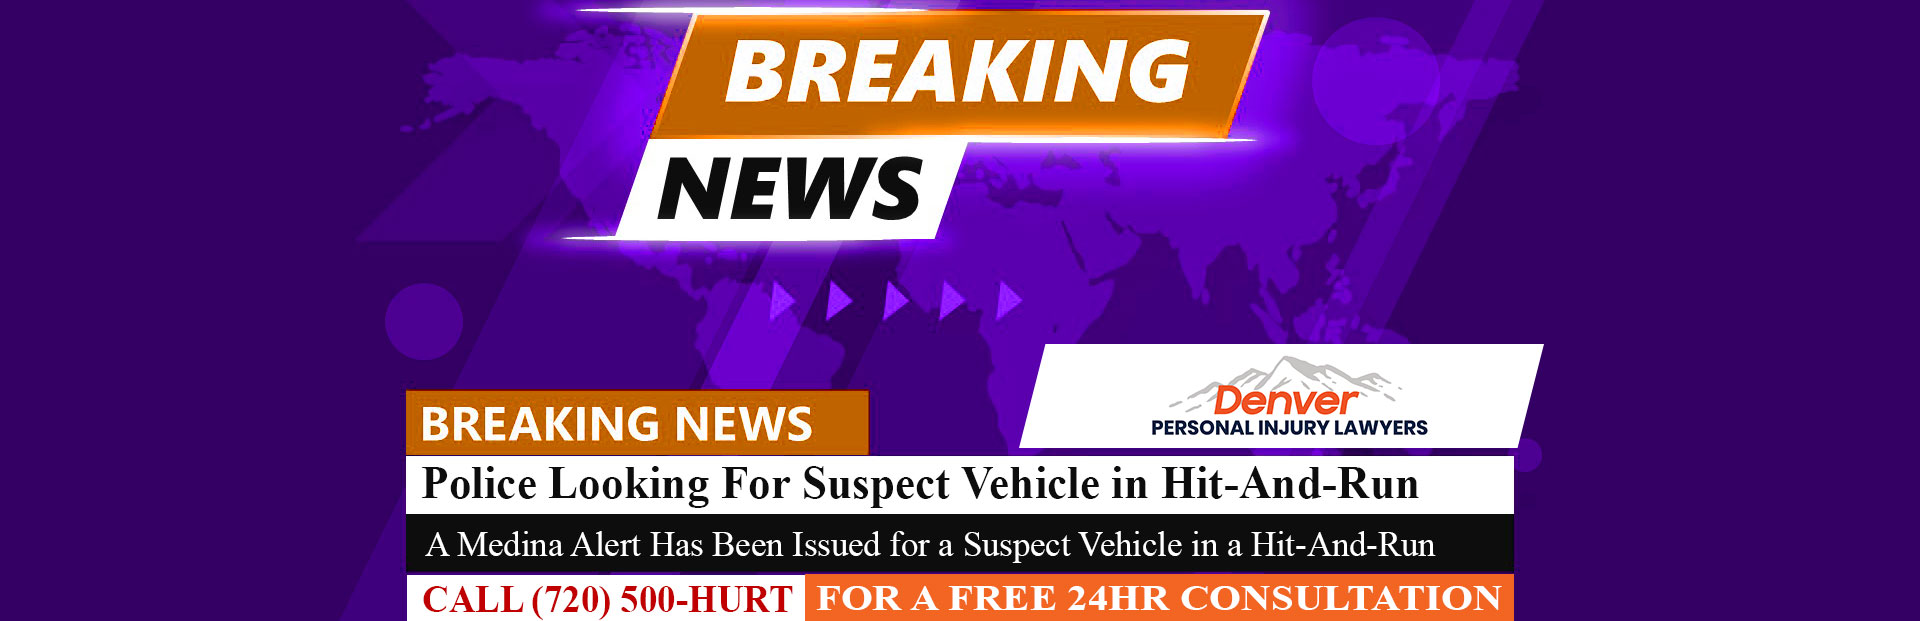 [05-07-23] Police Looking For Suspect Vehicle in Hit-And-Run